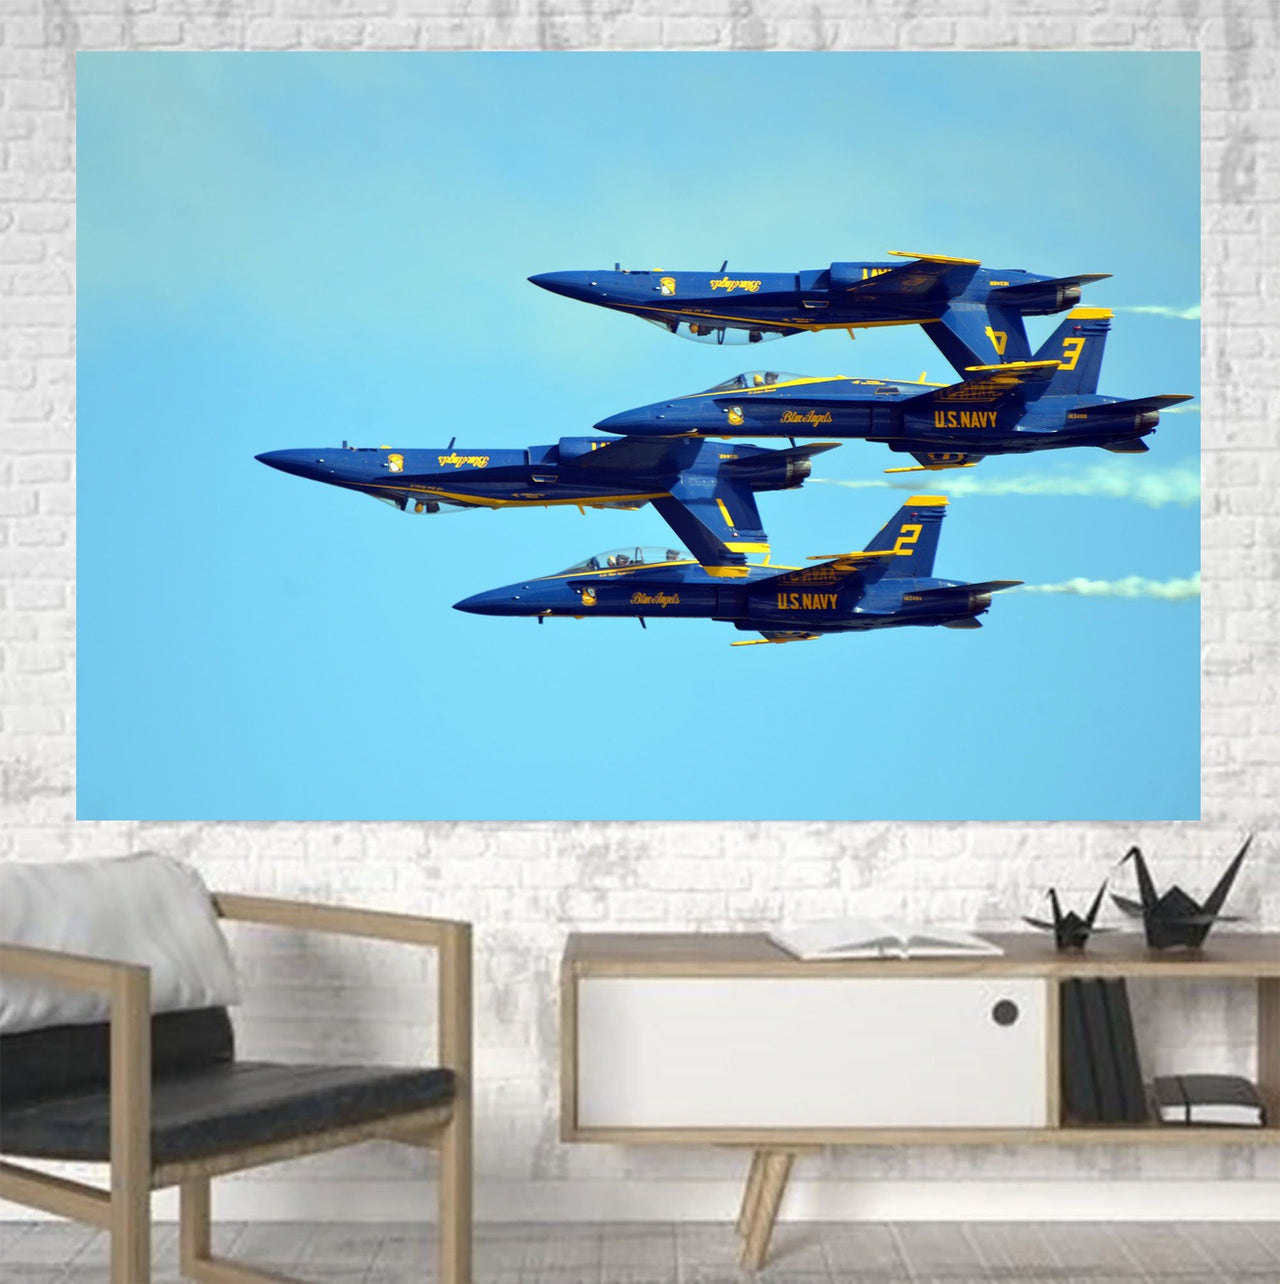 US Navy Blue Angels Printed Canvas Posters (1 Piece) Aviation Shop 